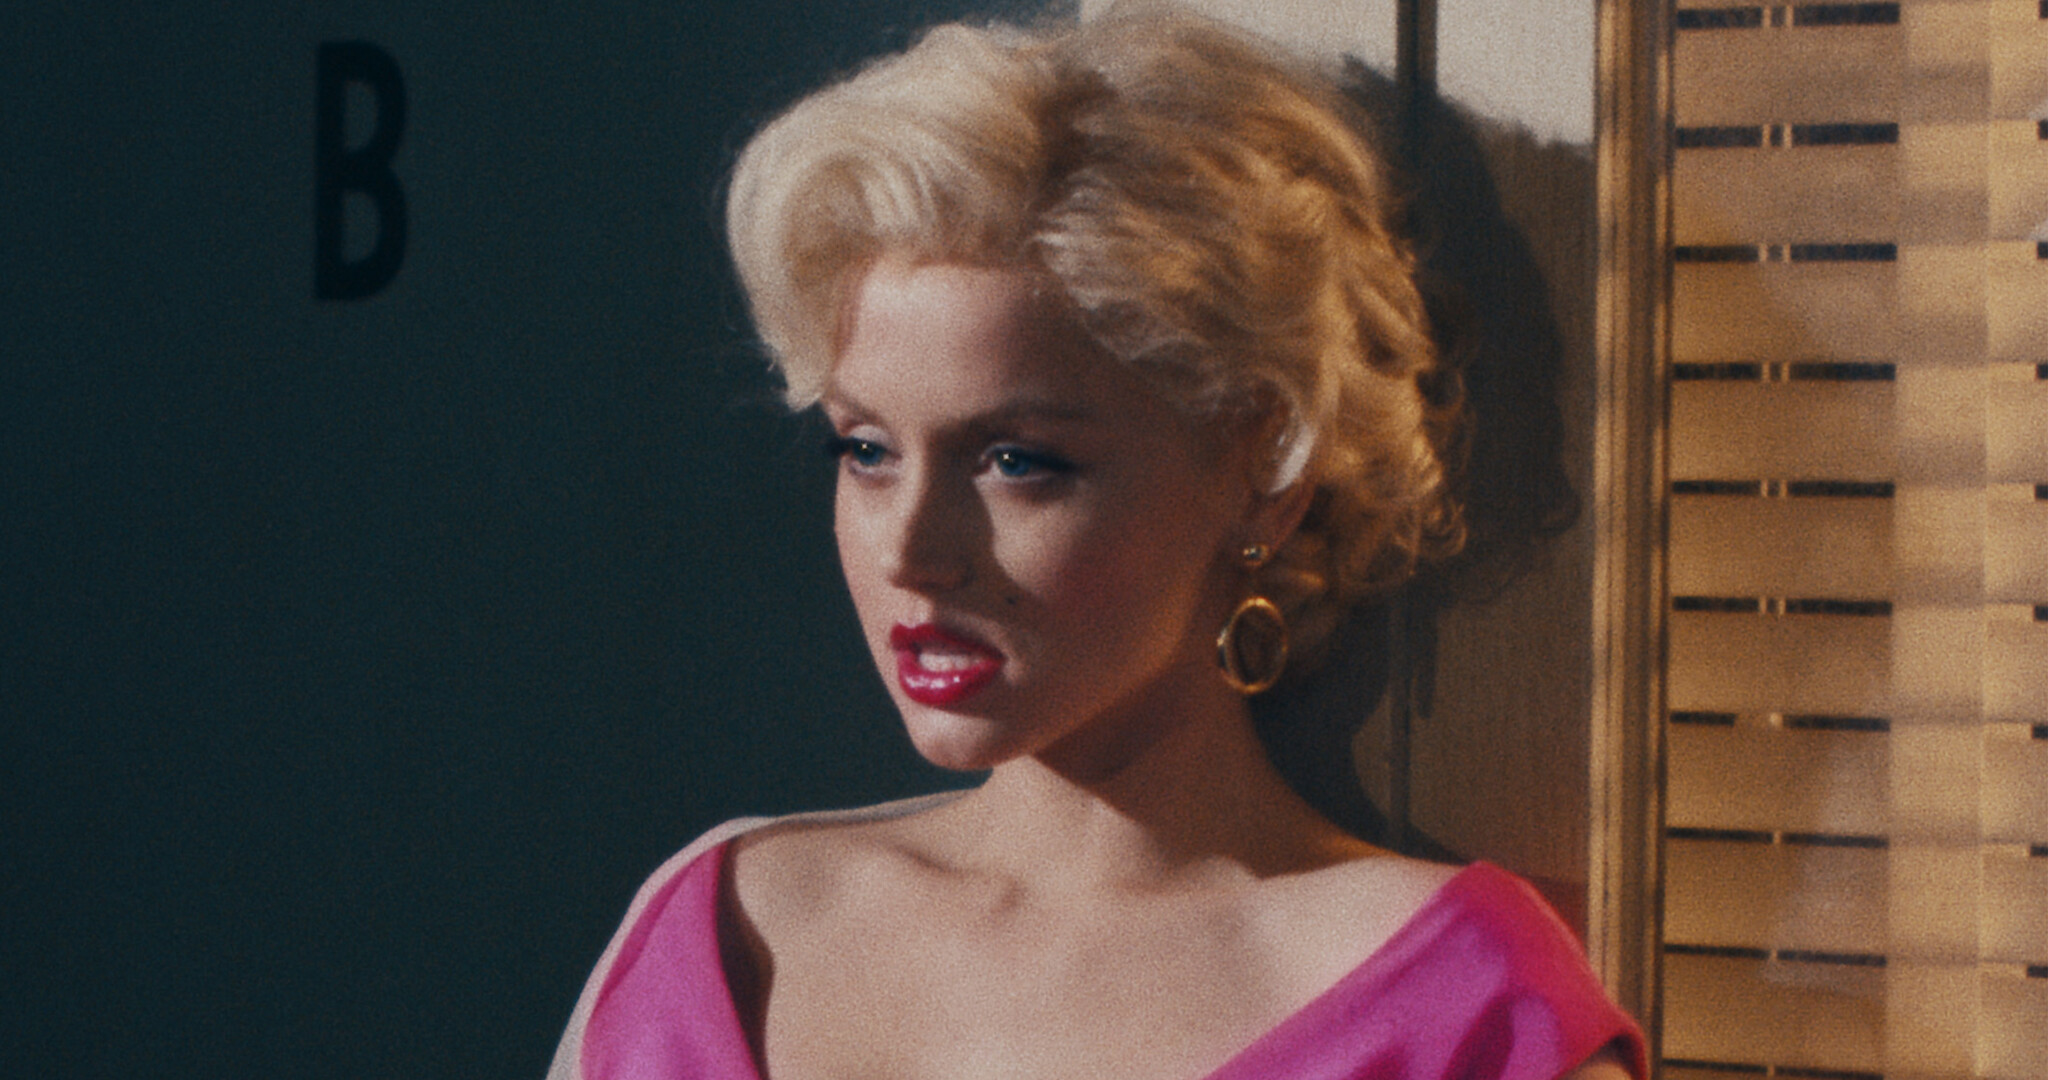 Who Stars In Blonde Marilyn Monroe Movie With Ana de Armas? image